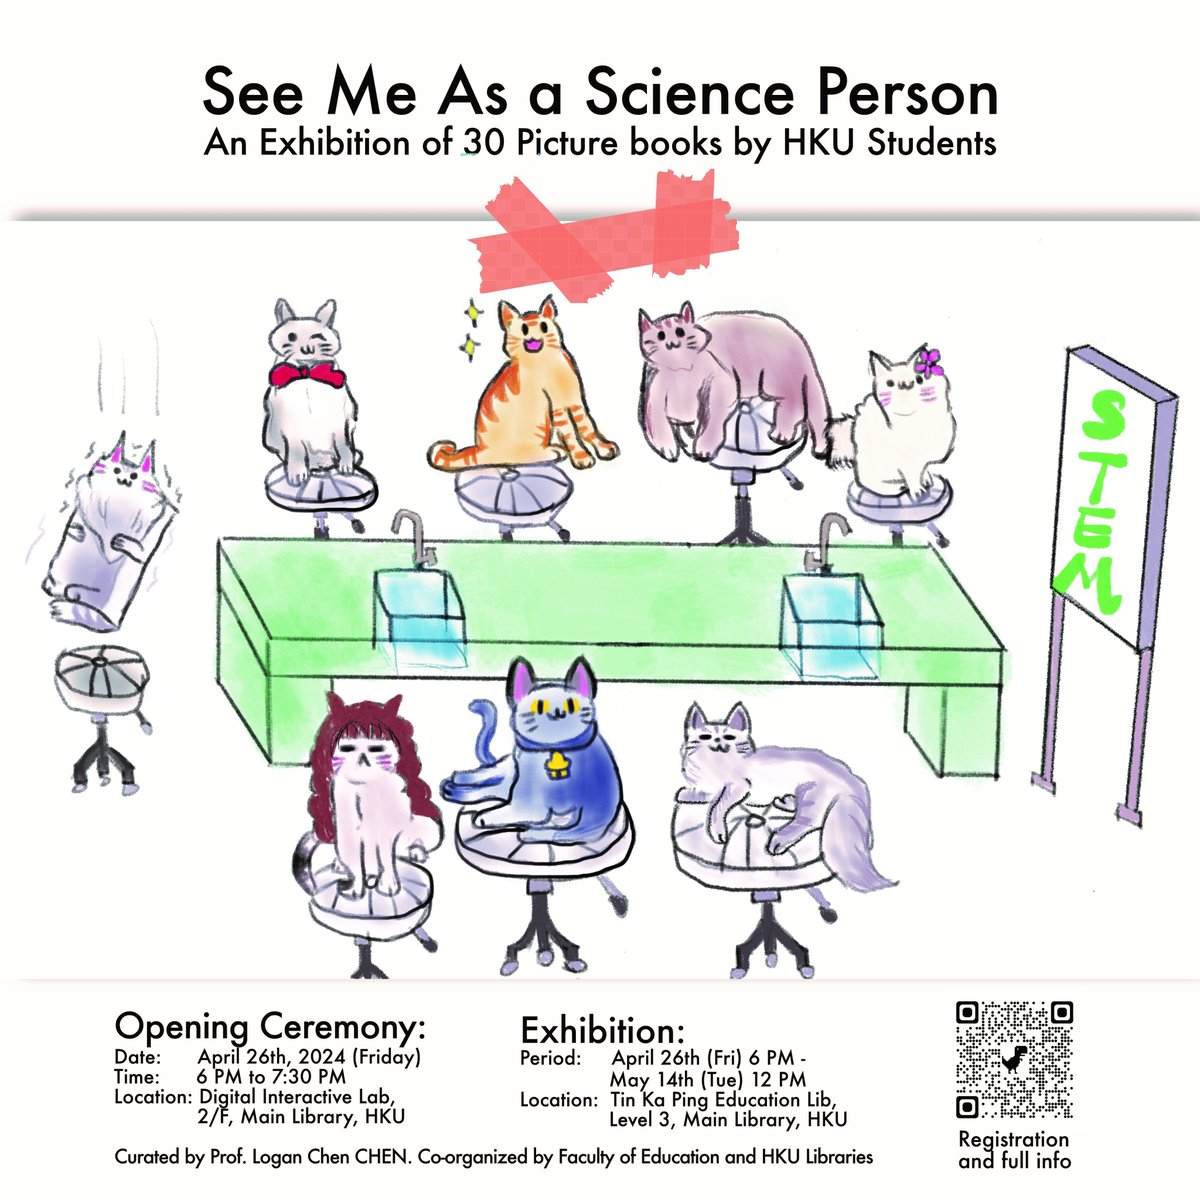 Immerse yourself in the 'See Me As A Science Person' Picture Books Exhibition, co-organised by the HKU Faculty of Education and the HKU Libraries! *Opening Ceremony* : 6pm – 7:30pm, April 26,2024 Registration: hkuems1.hku.hk/hkuems/ec_regf… *Exhibition* : April 26 - May 14, 2024